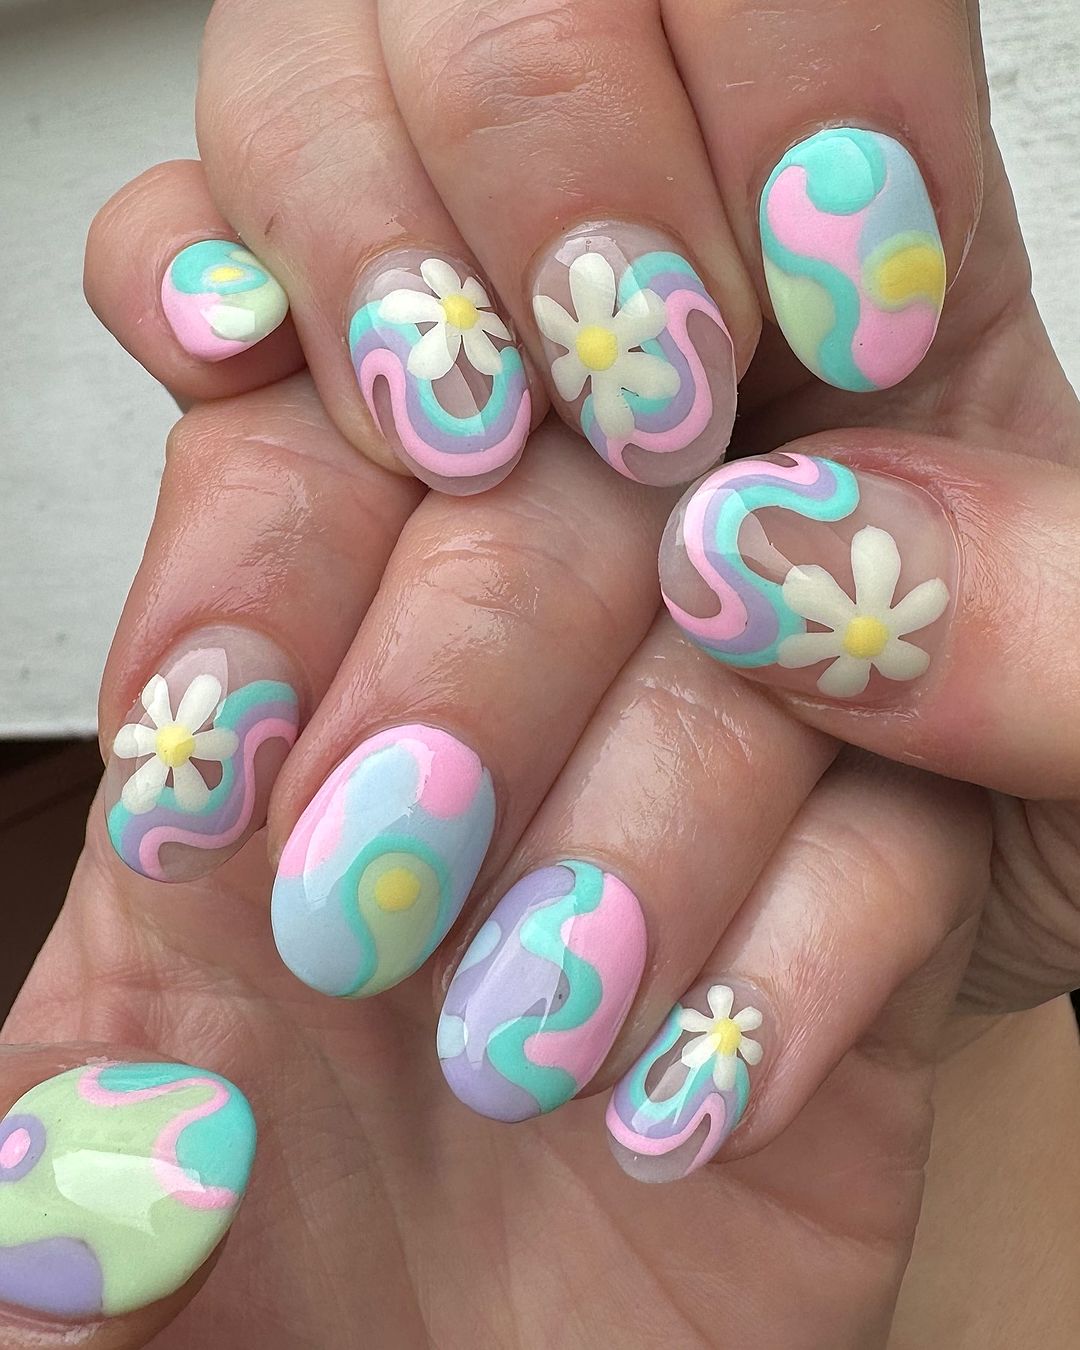 Short Oval Nails With Pastel Rainbow Swirls